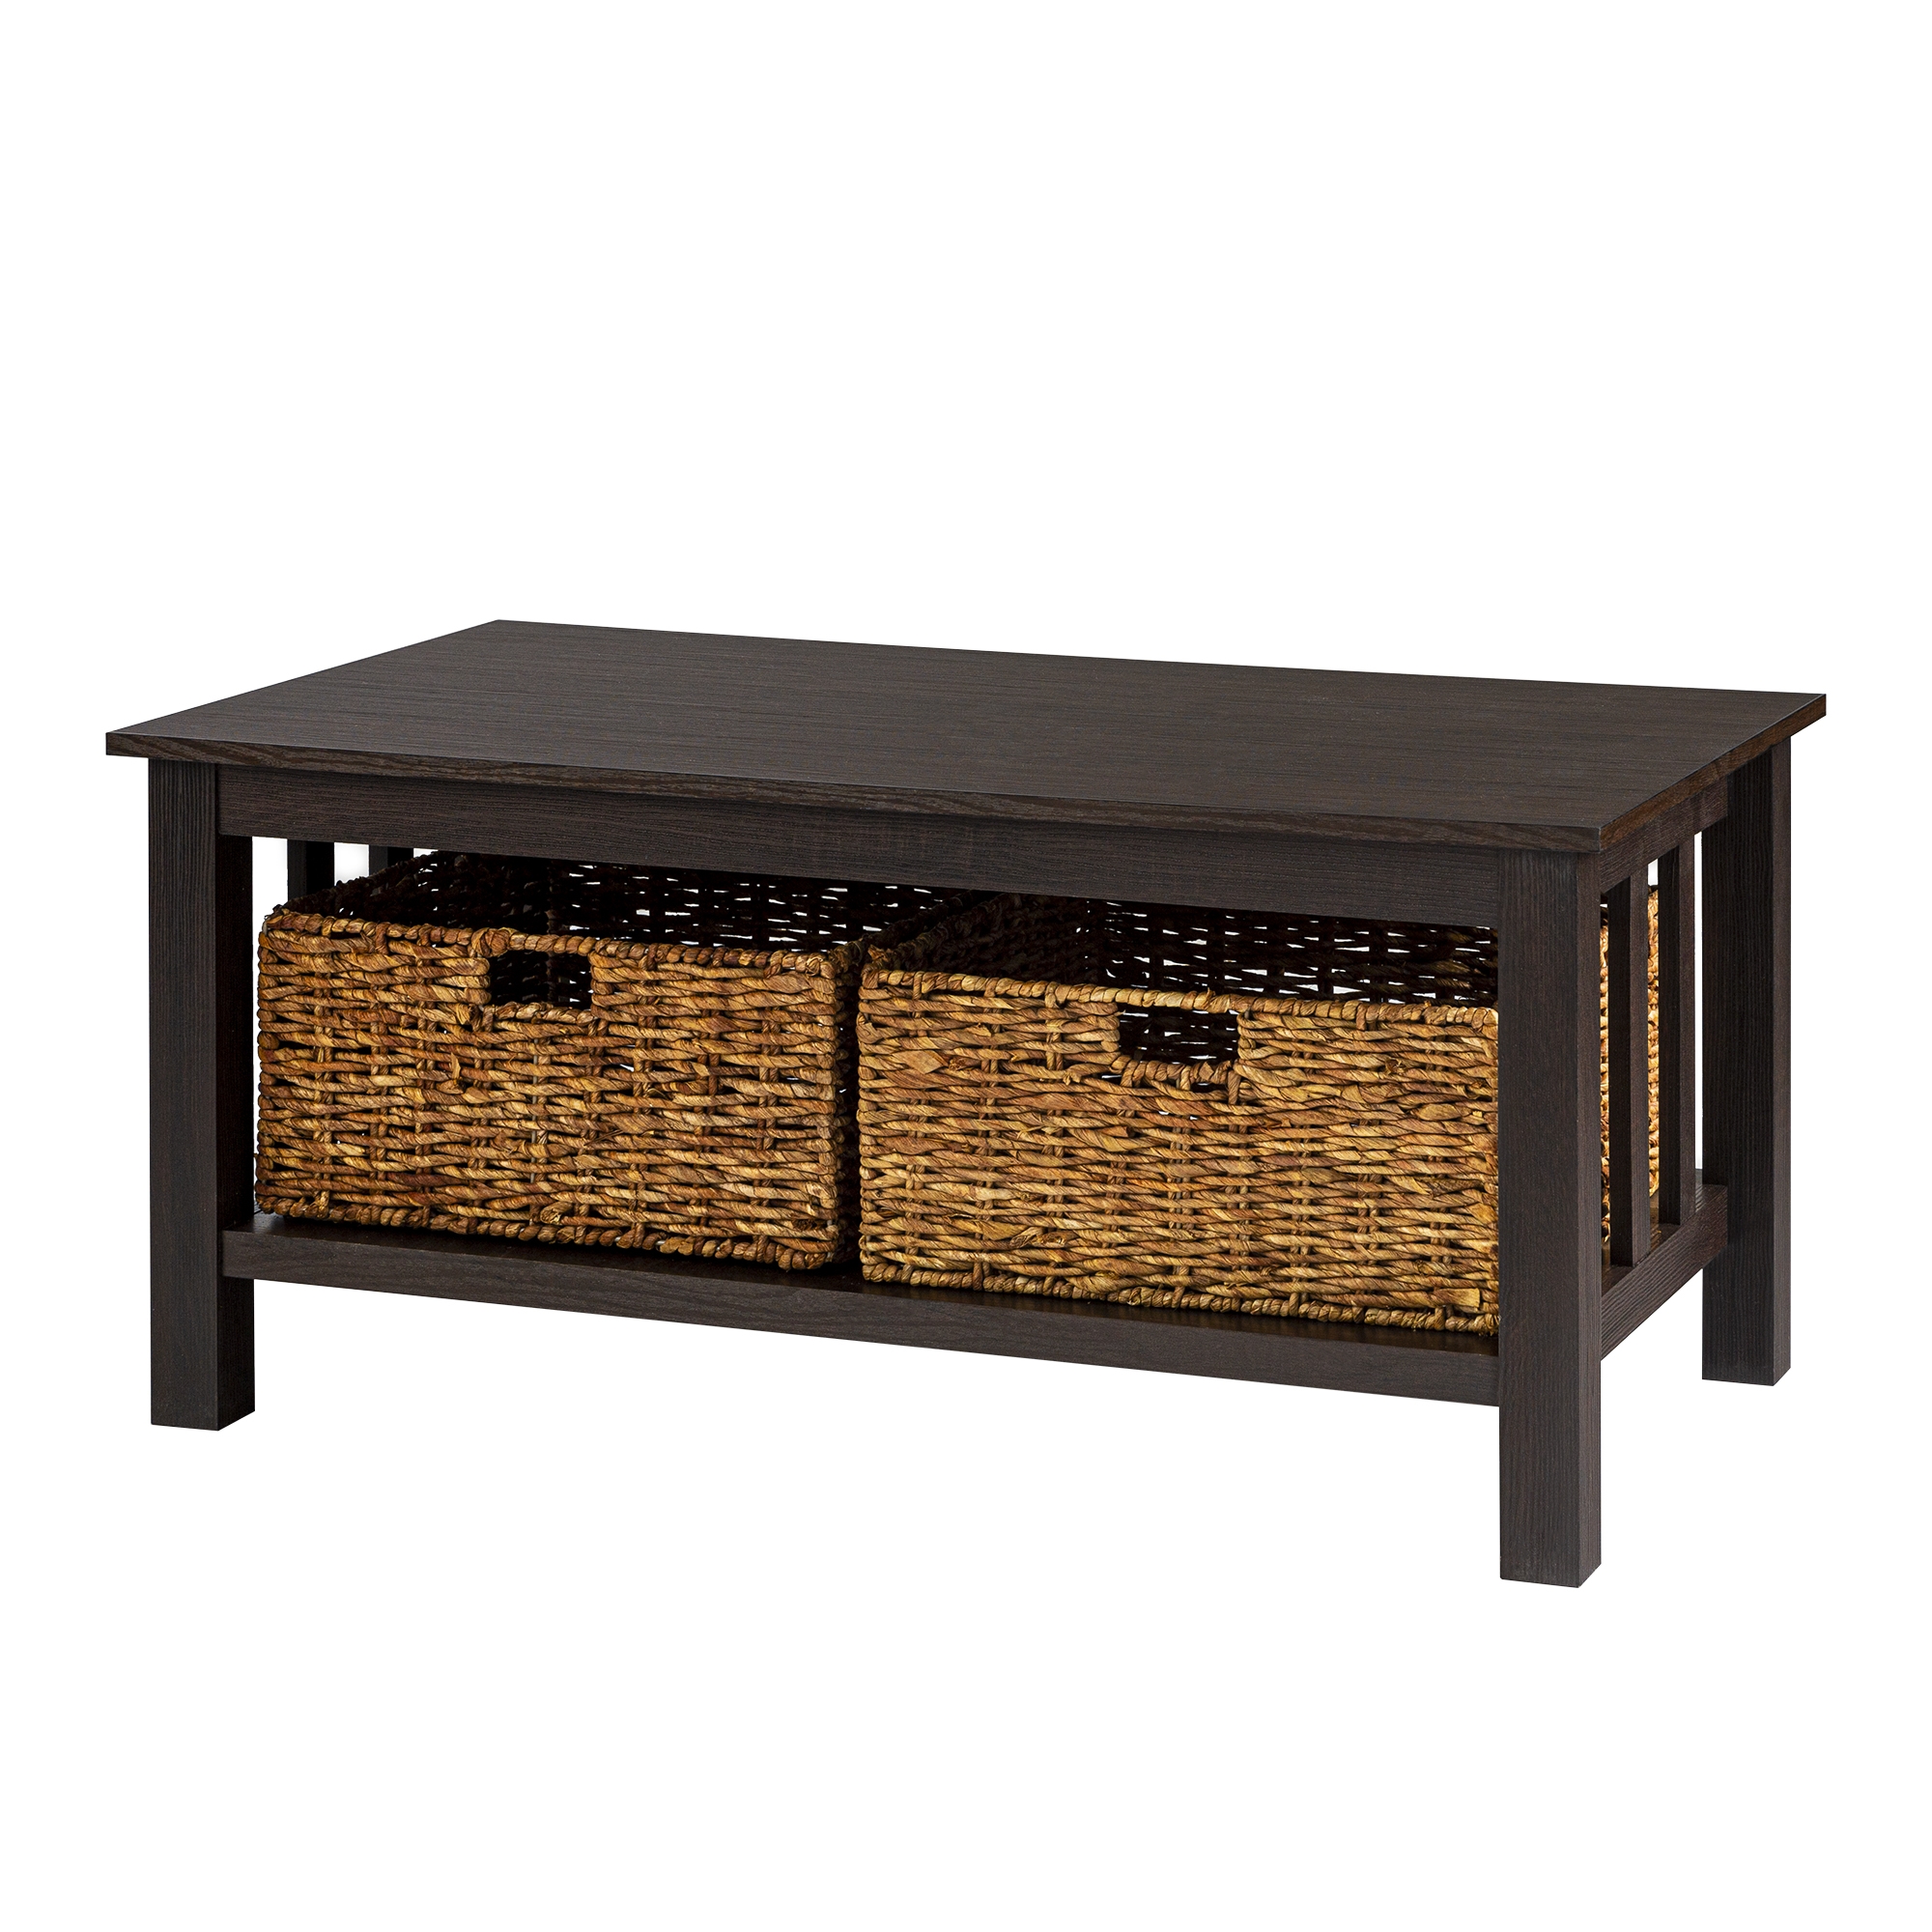 Mission Storage Coffee Table with Baskets - Espresso - Image 2